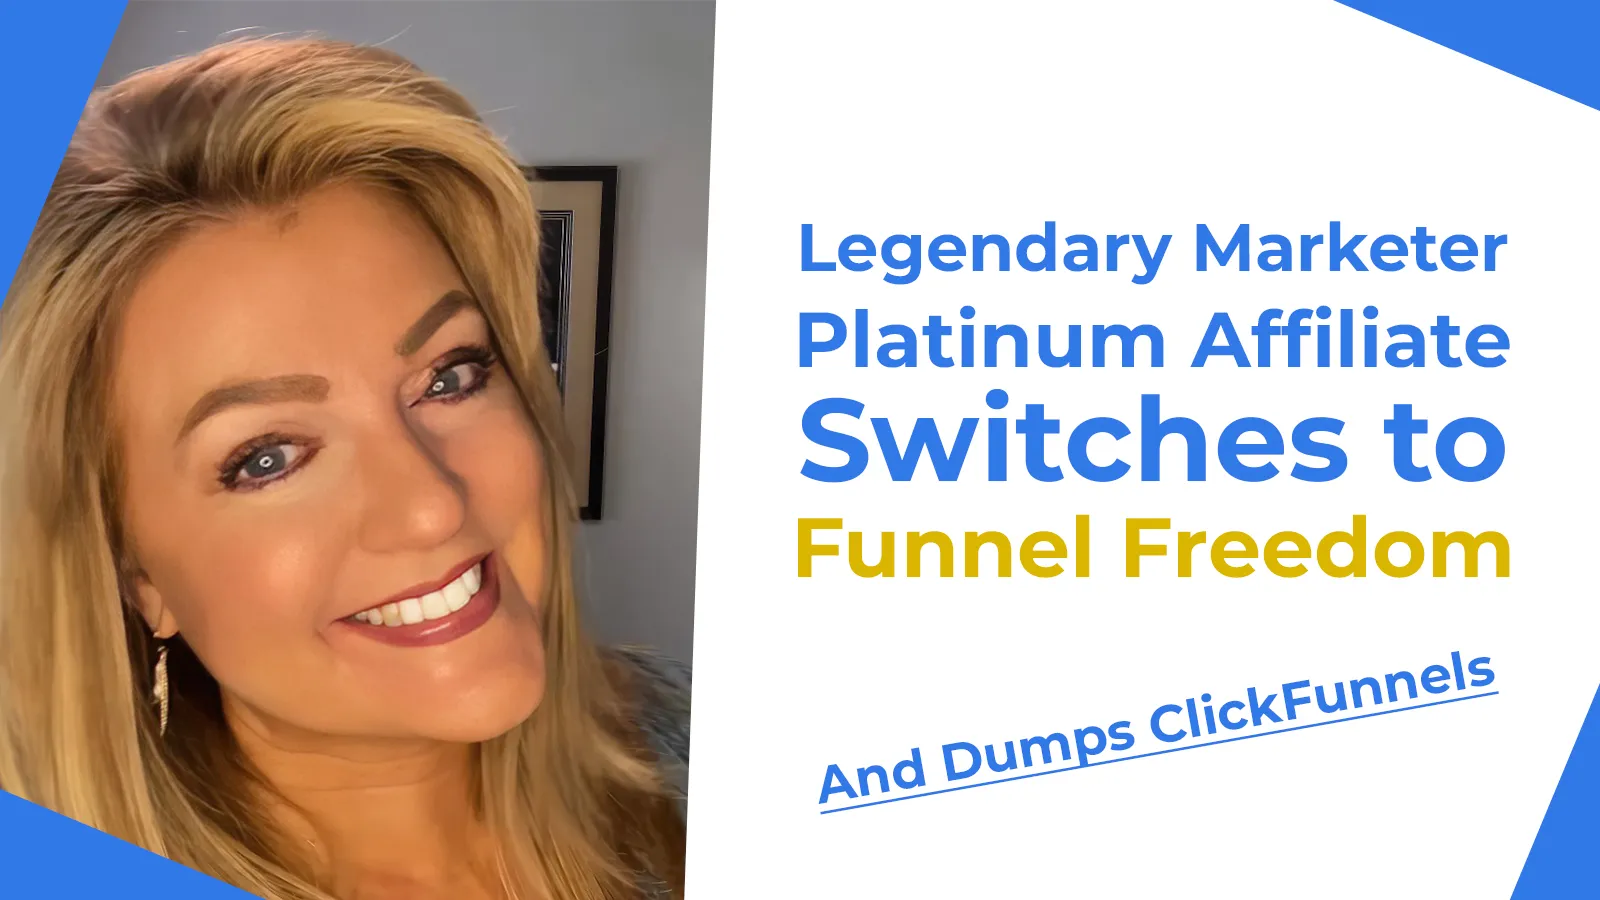 Legendary Marketer platinum affiliate switches to Funnel Freedom